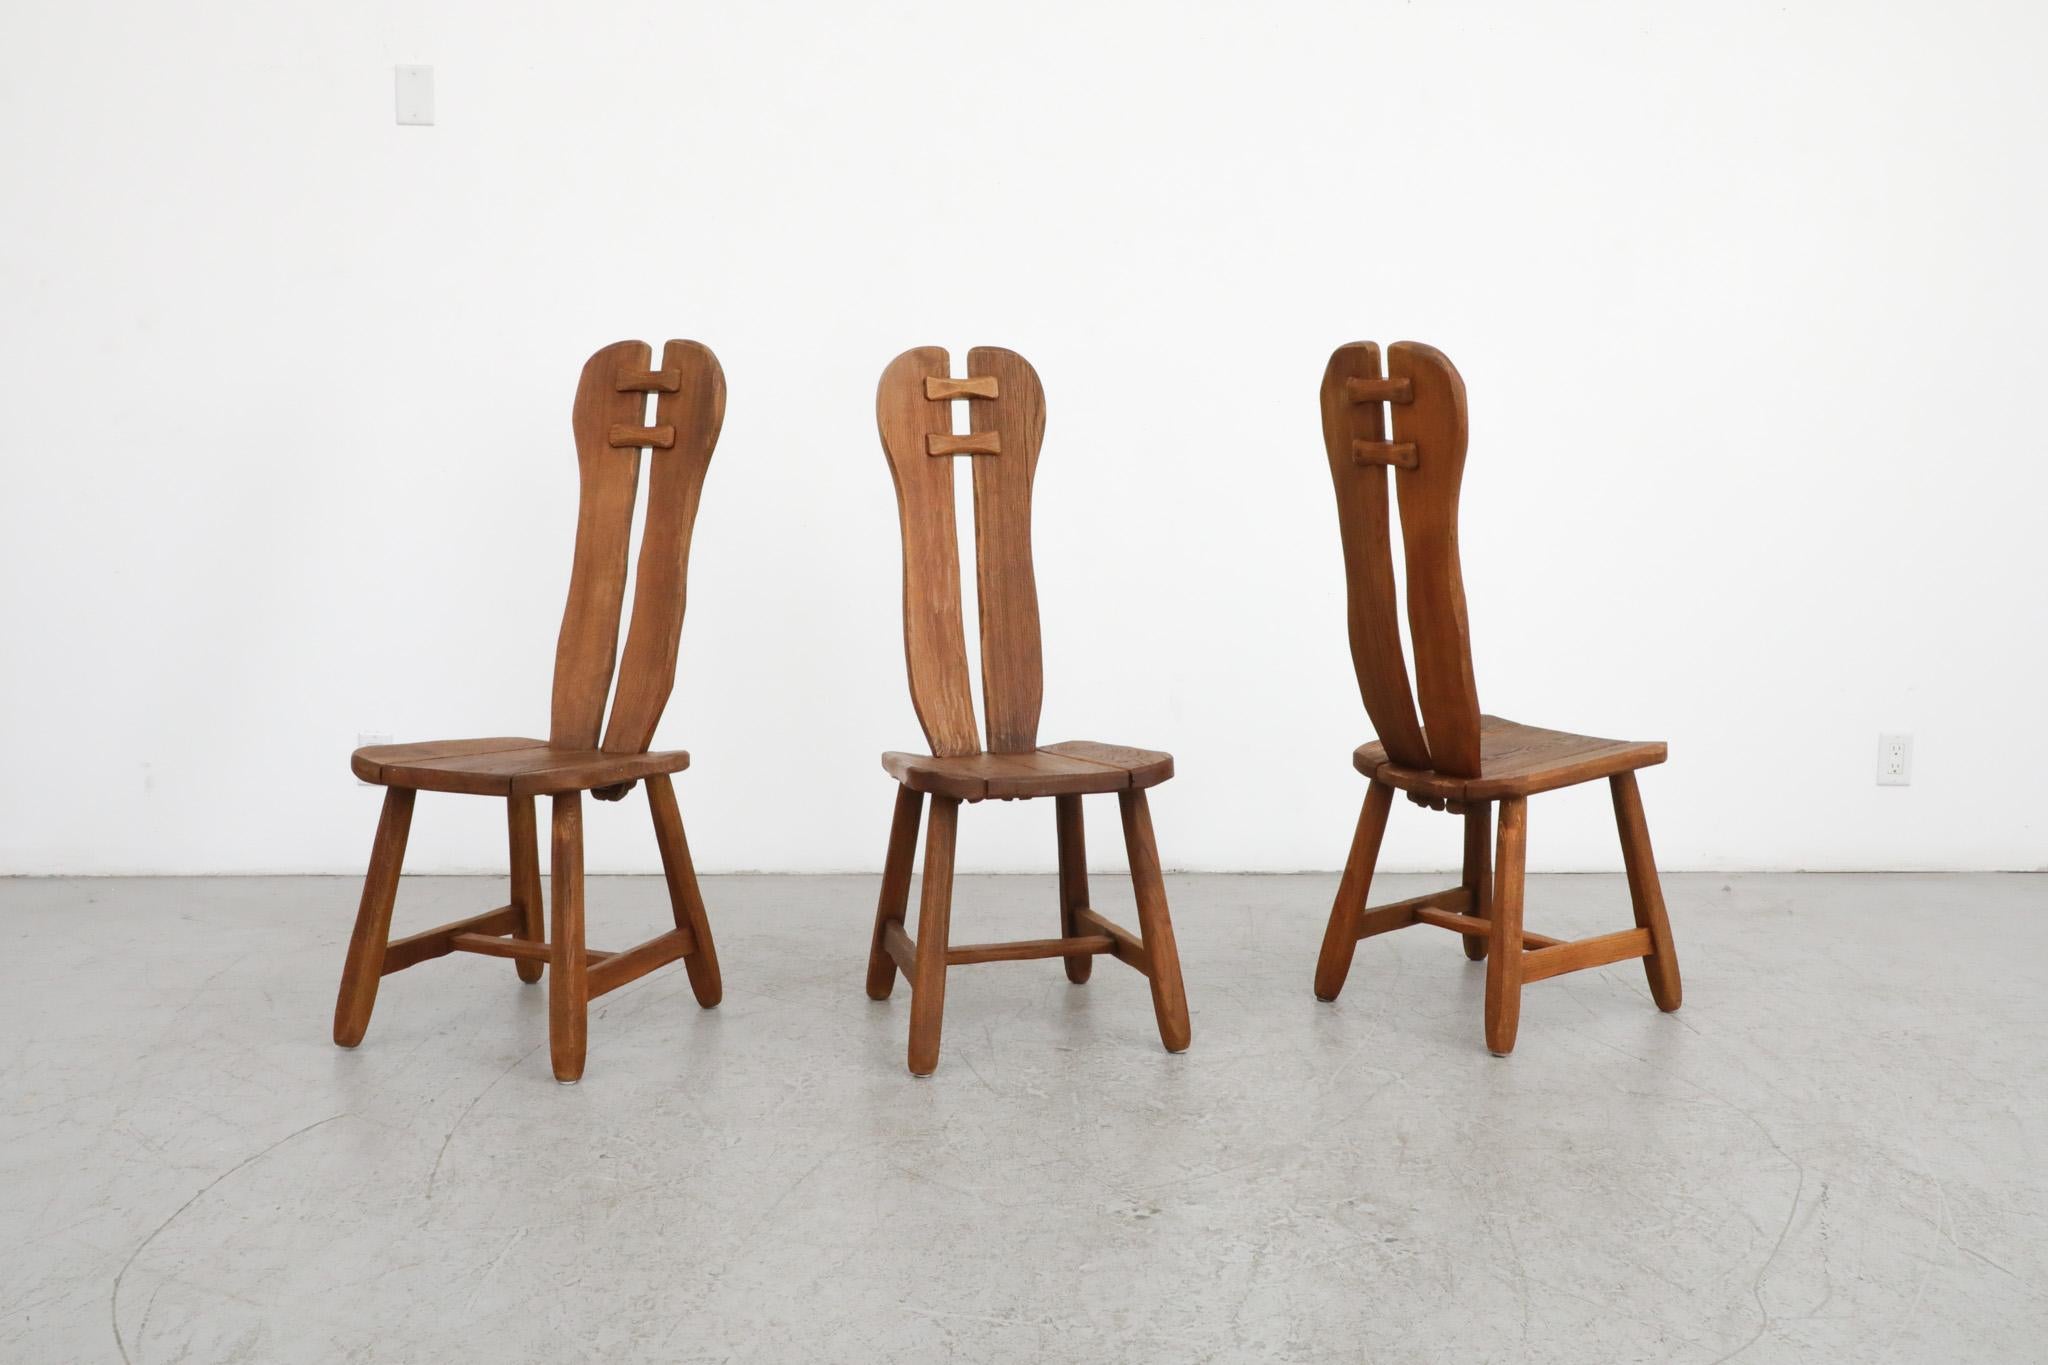 Mid-Century, high back brutalist dining chairs by De Puydt, Belgium. Distinct design from the 1970's, made from rough oak with heavy grain. In original condition with some visible cracking and normal wear and patina for their age. Sold individually.